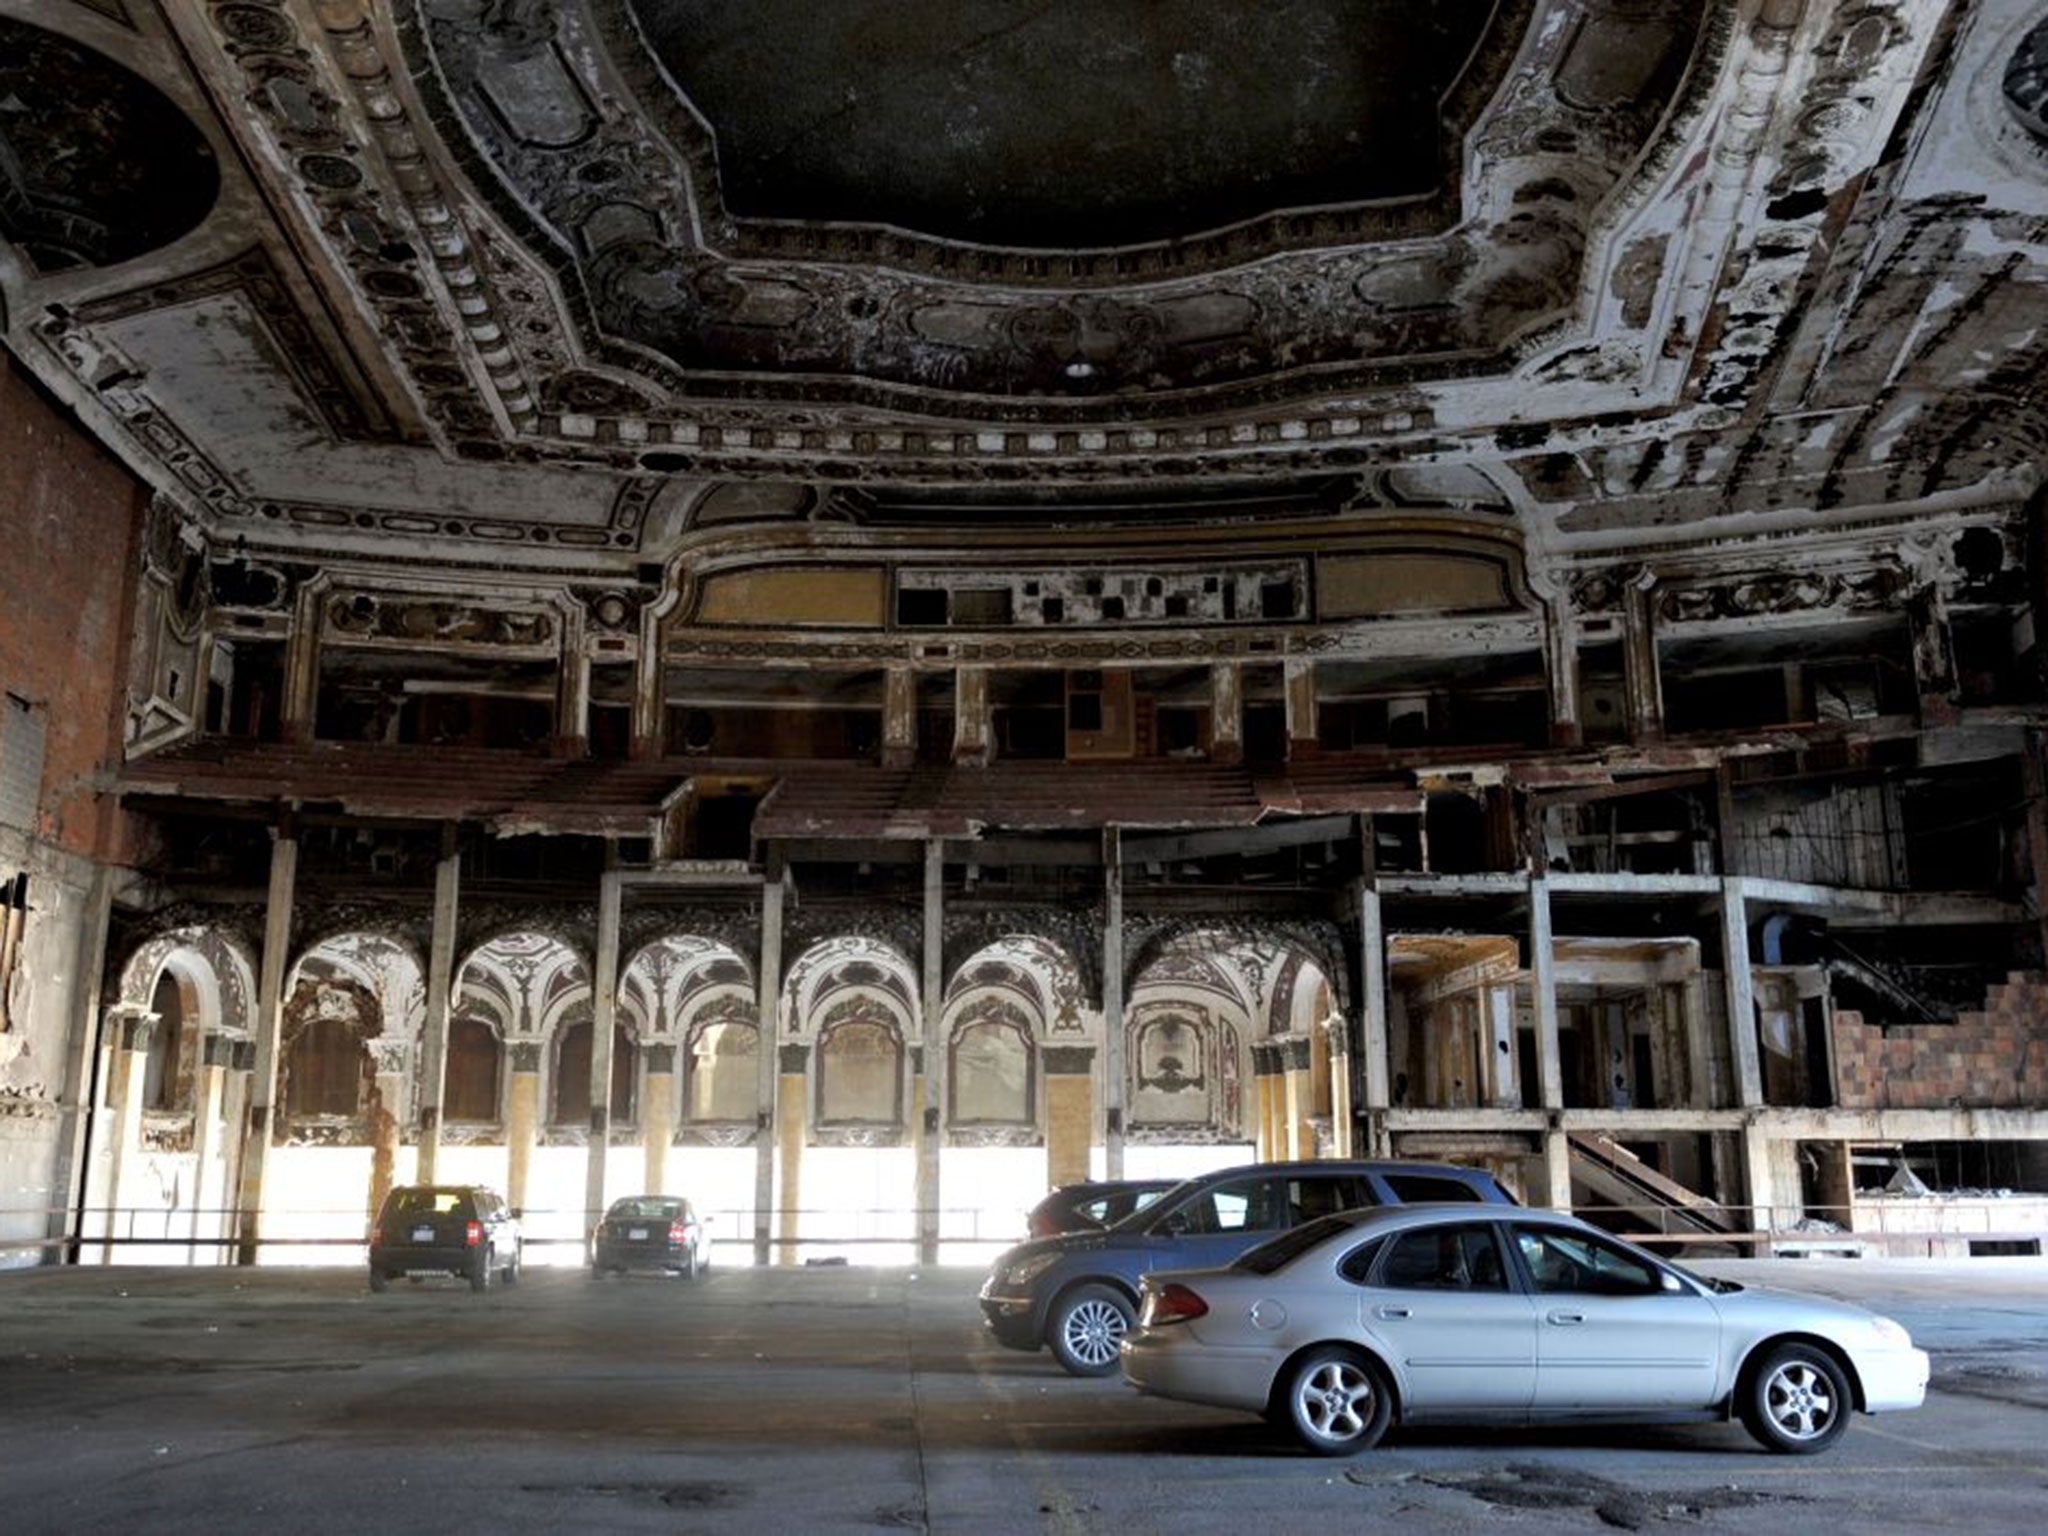 Detroit’s once glorious and now decrepit Michigan Theater now operates as a car park